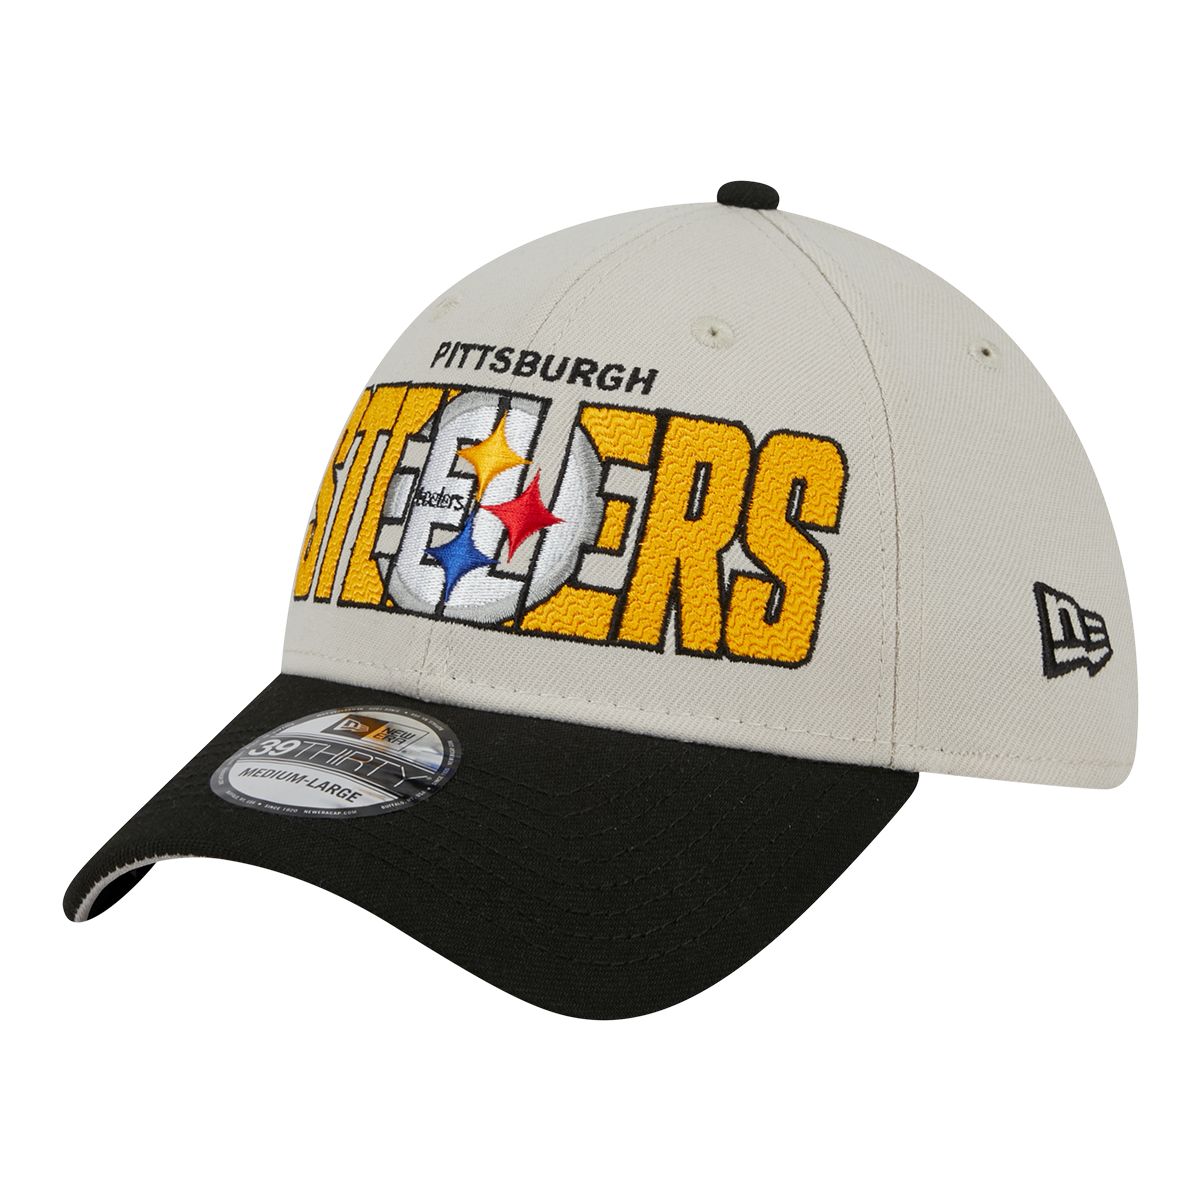 new steelers hat